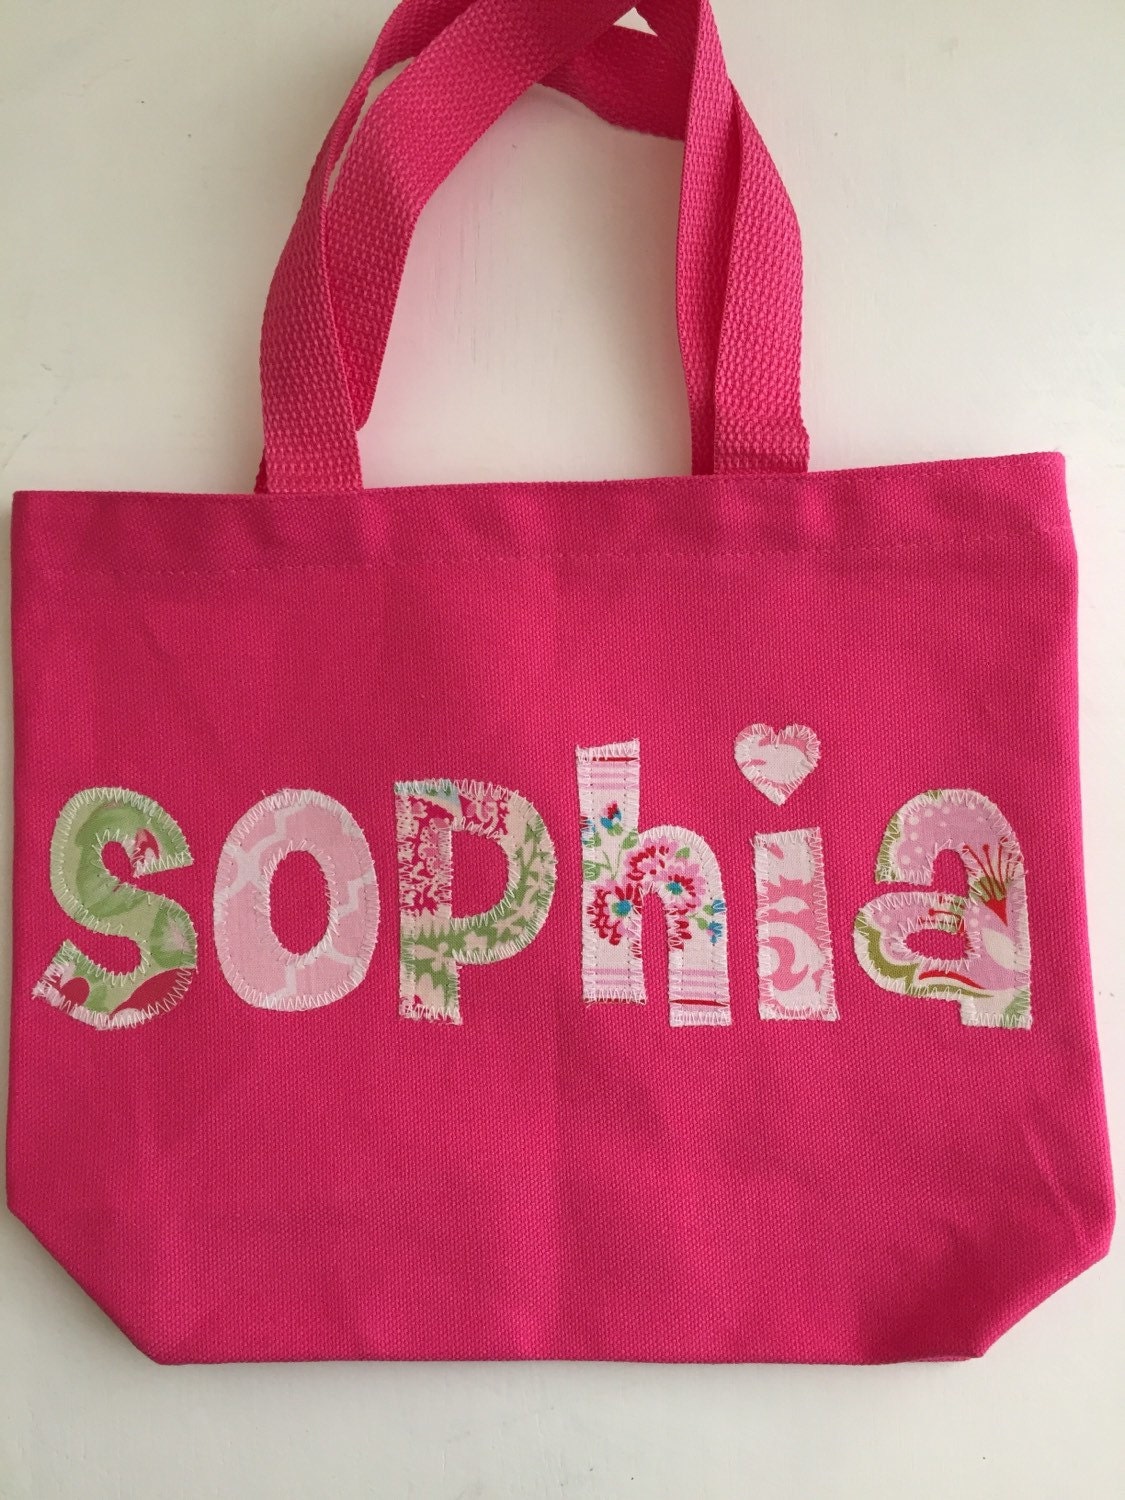 Girls Small Personalized Tote Bag Great Flower Girl Gift